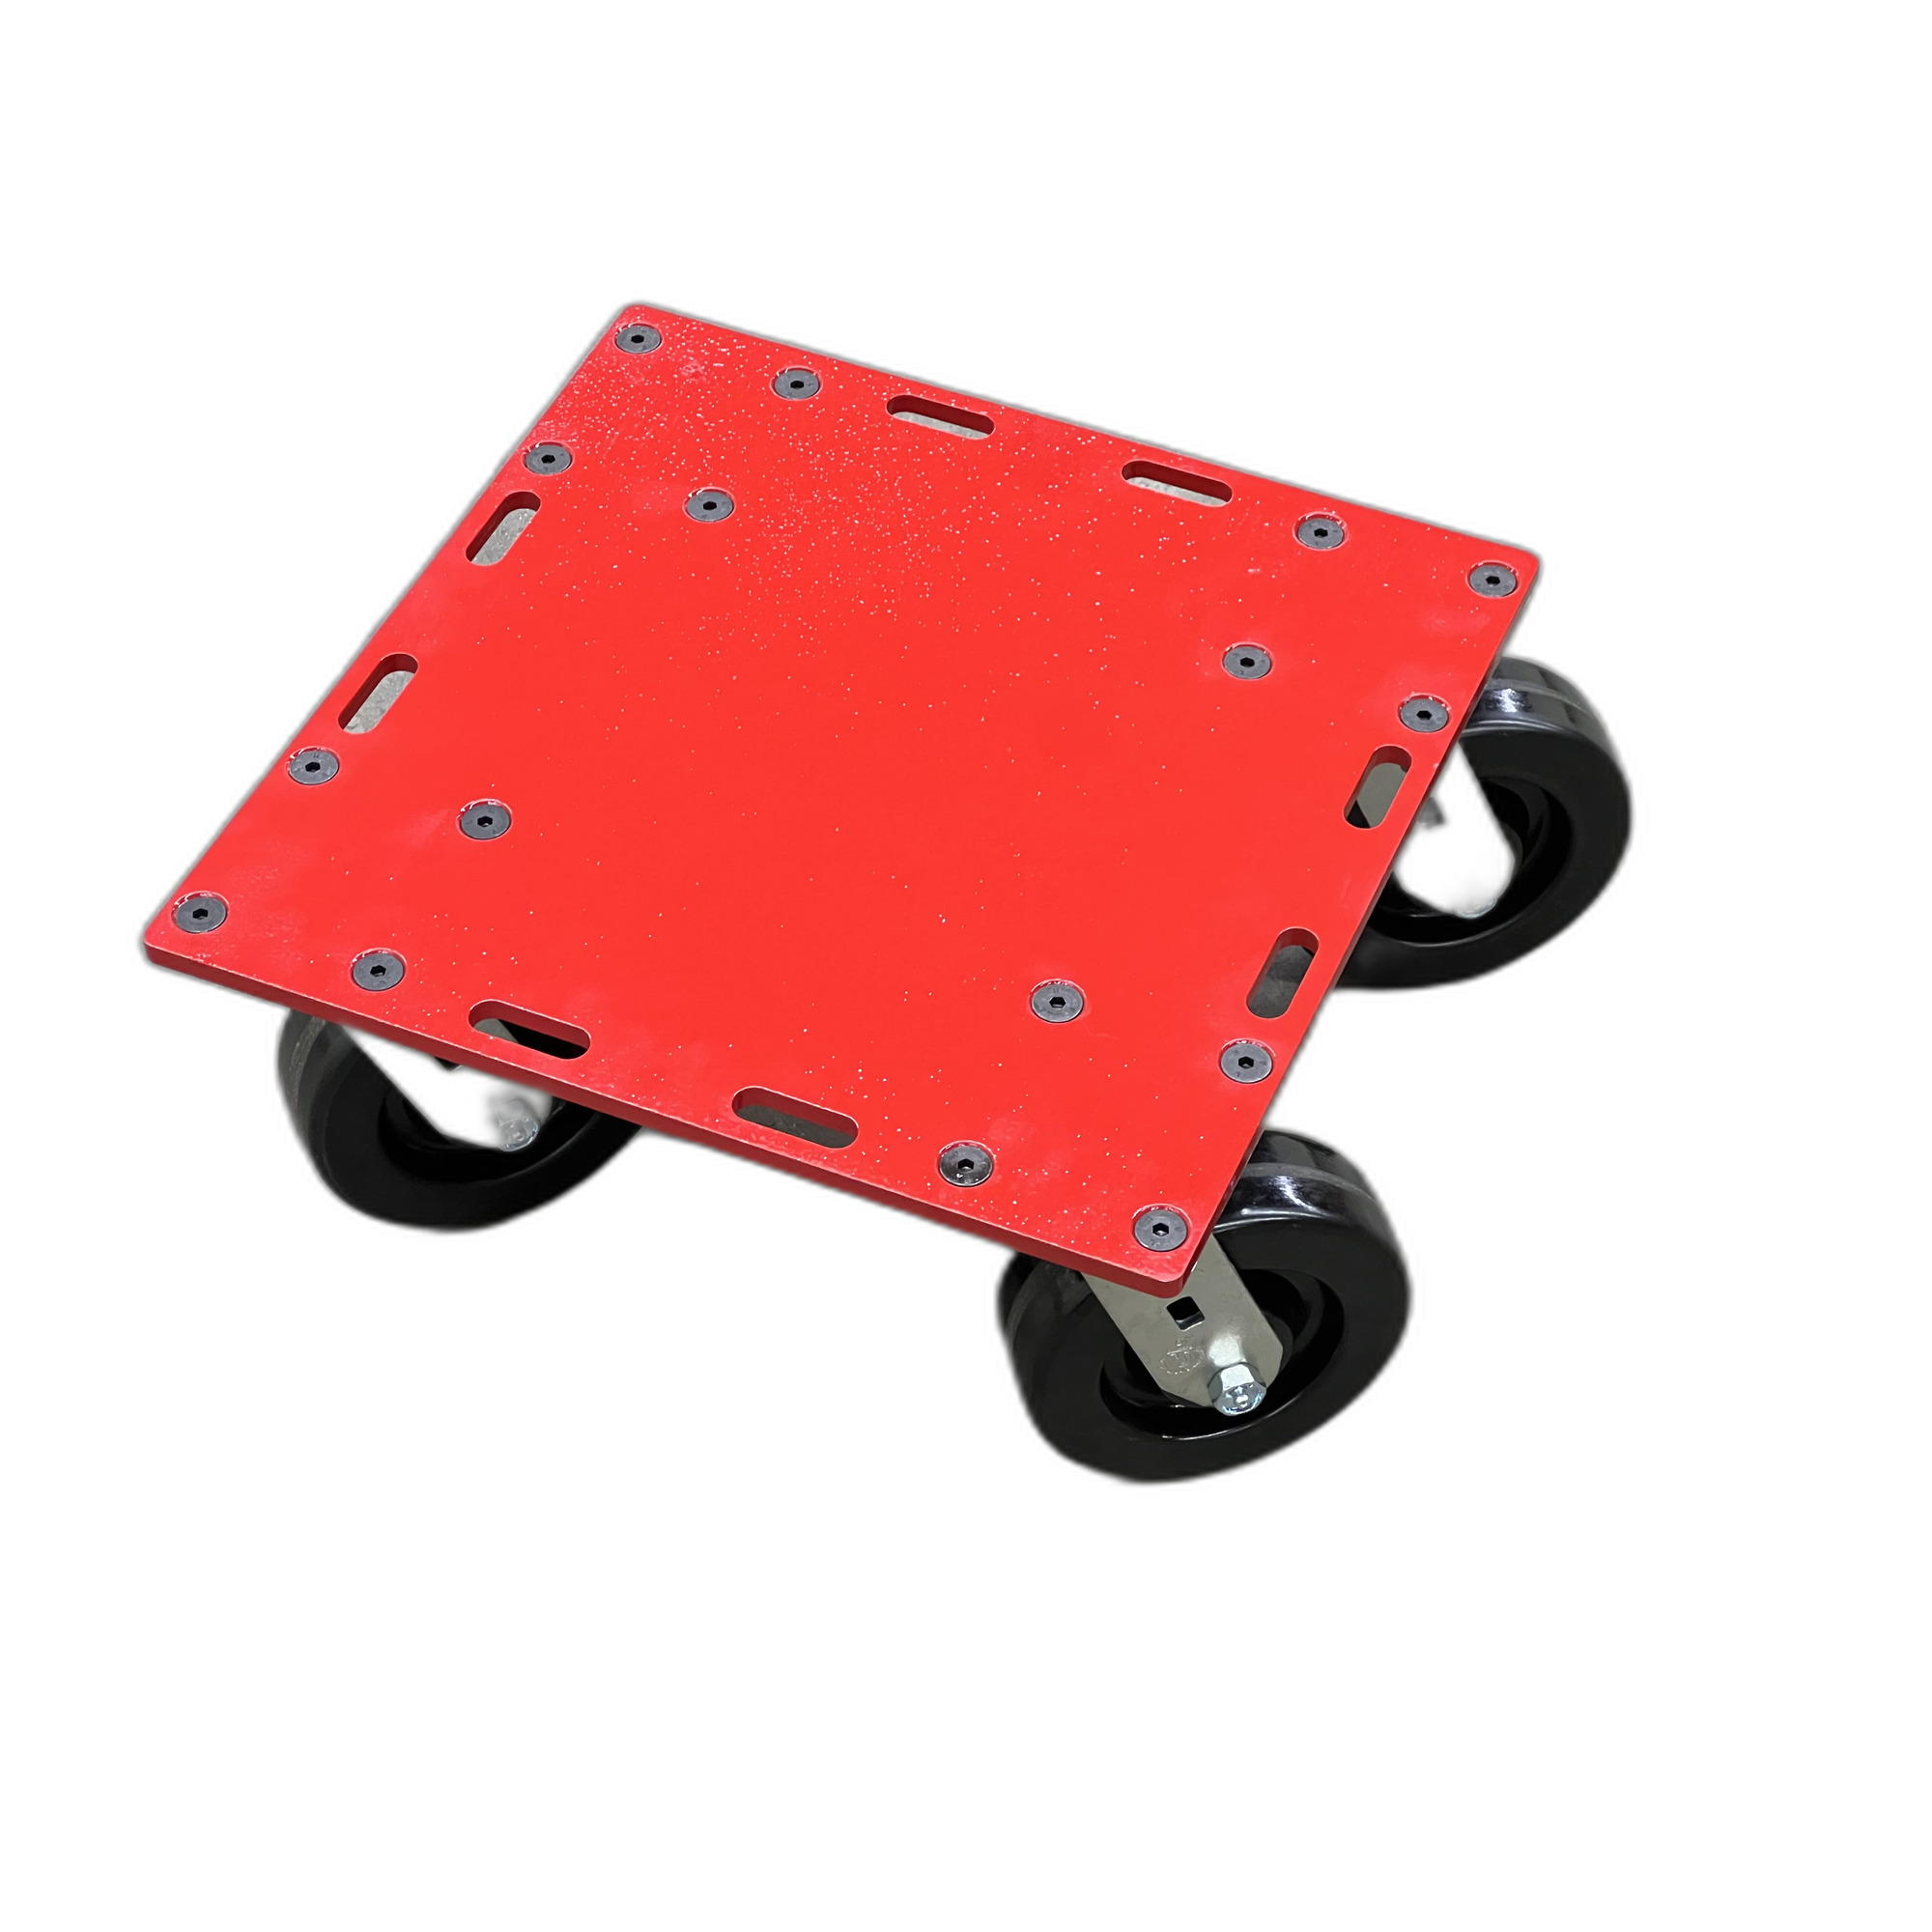 Merrick Industrial Dolly, Merrick Originals Slotted 4K Dolly, Capacity 4000 lb, Material Steel, Included (qty.) 1, Model M998066